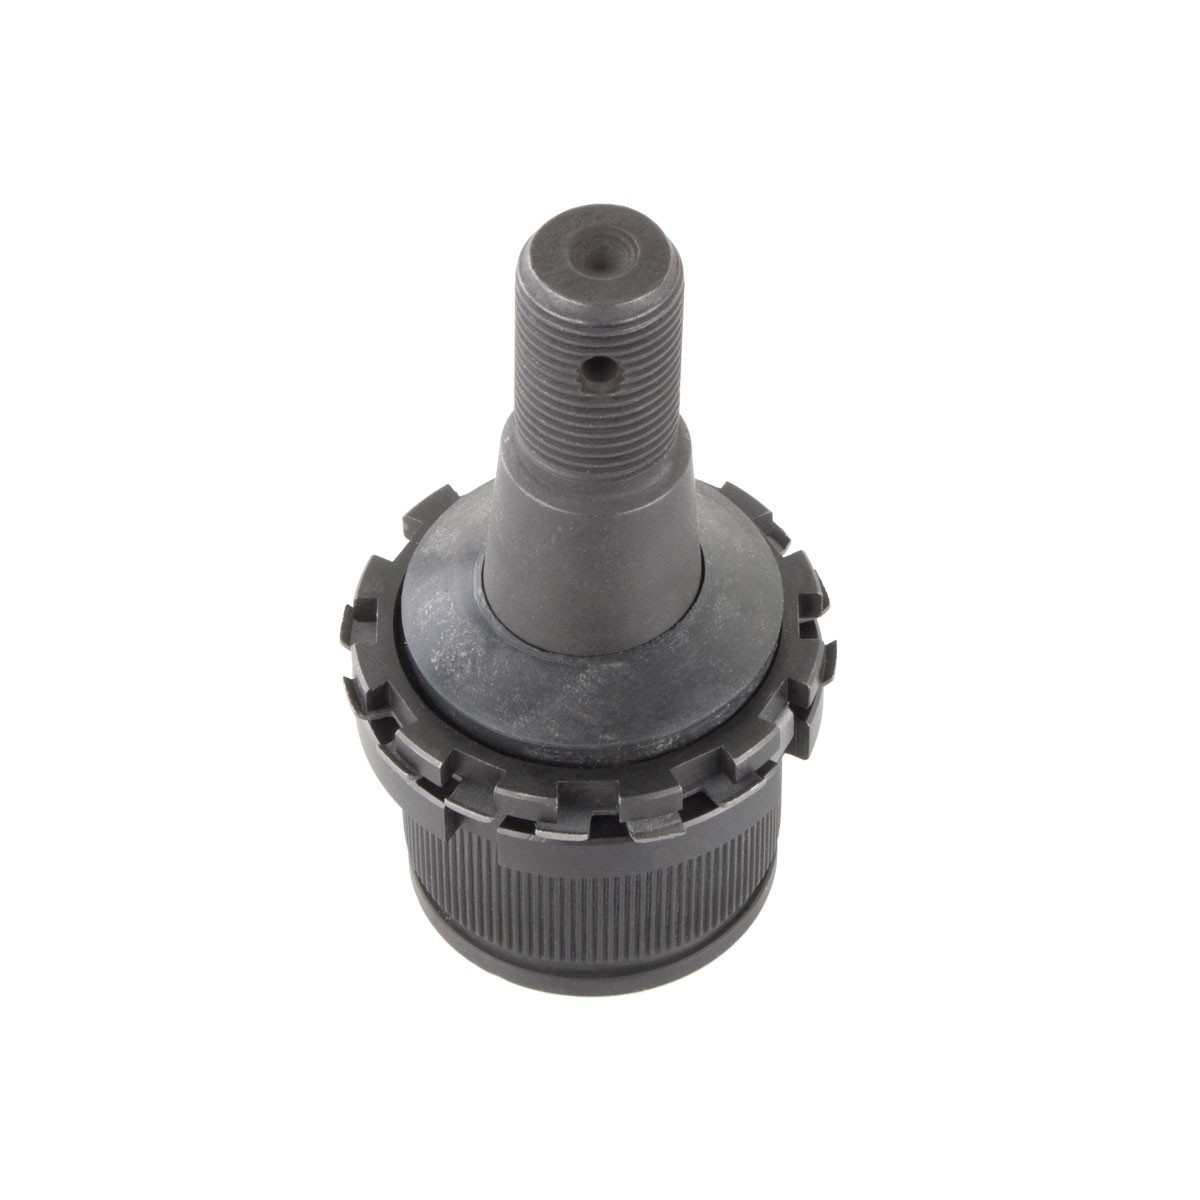 Adjustable Lower Ball Joint - Knurled